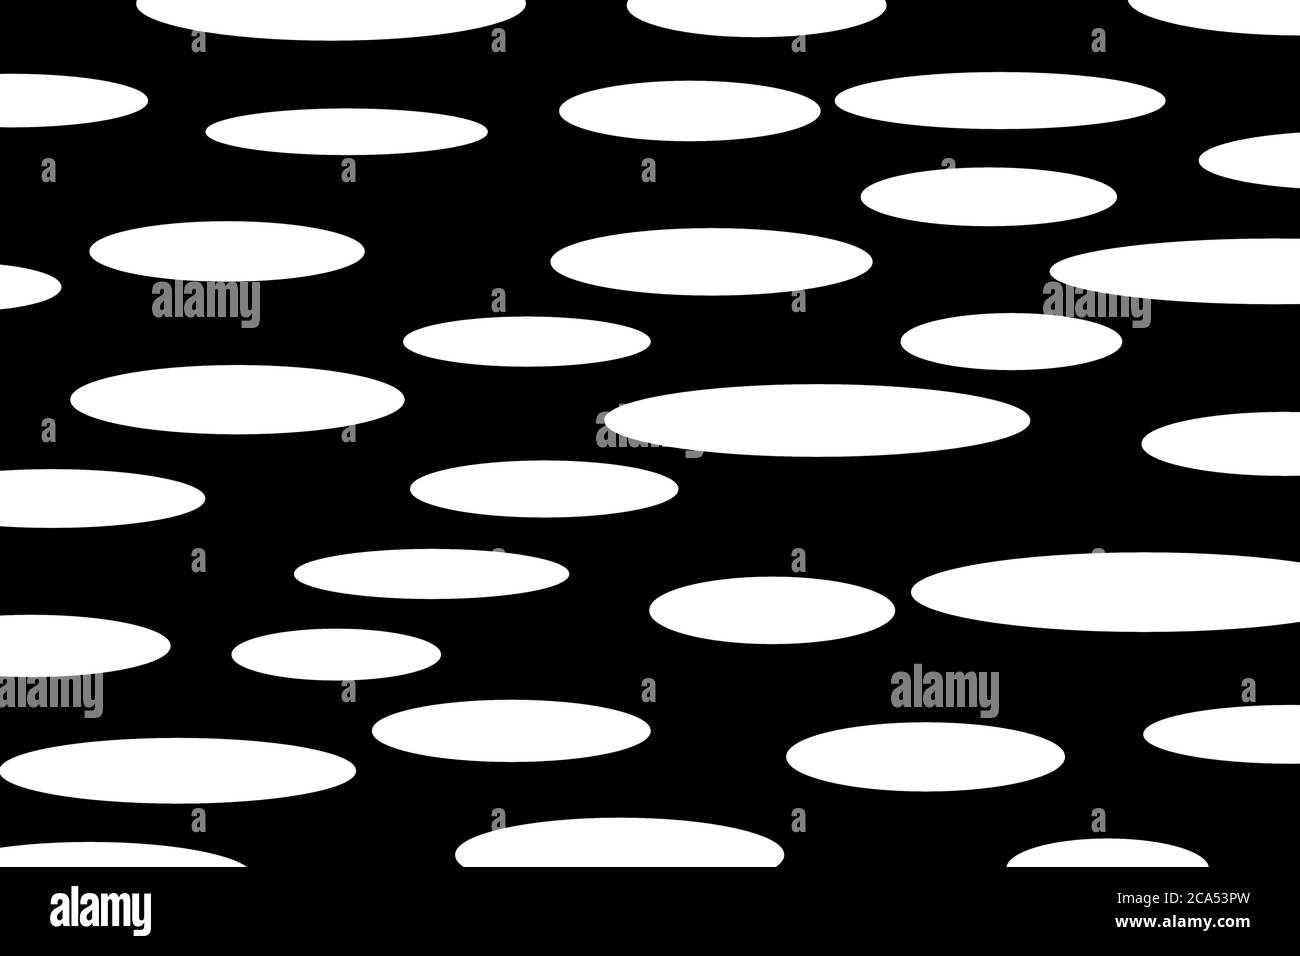 White spotted background pattern, horizontal white oval shapes on black background for packaging, fabric, wallpaper, textile, dress and shirt design Stock Photo